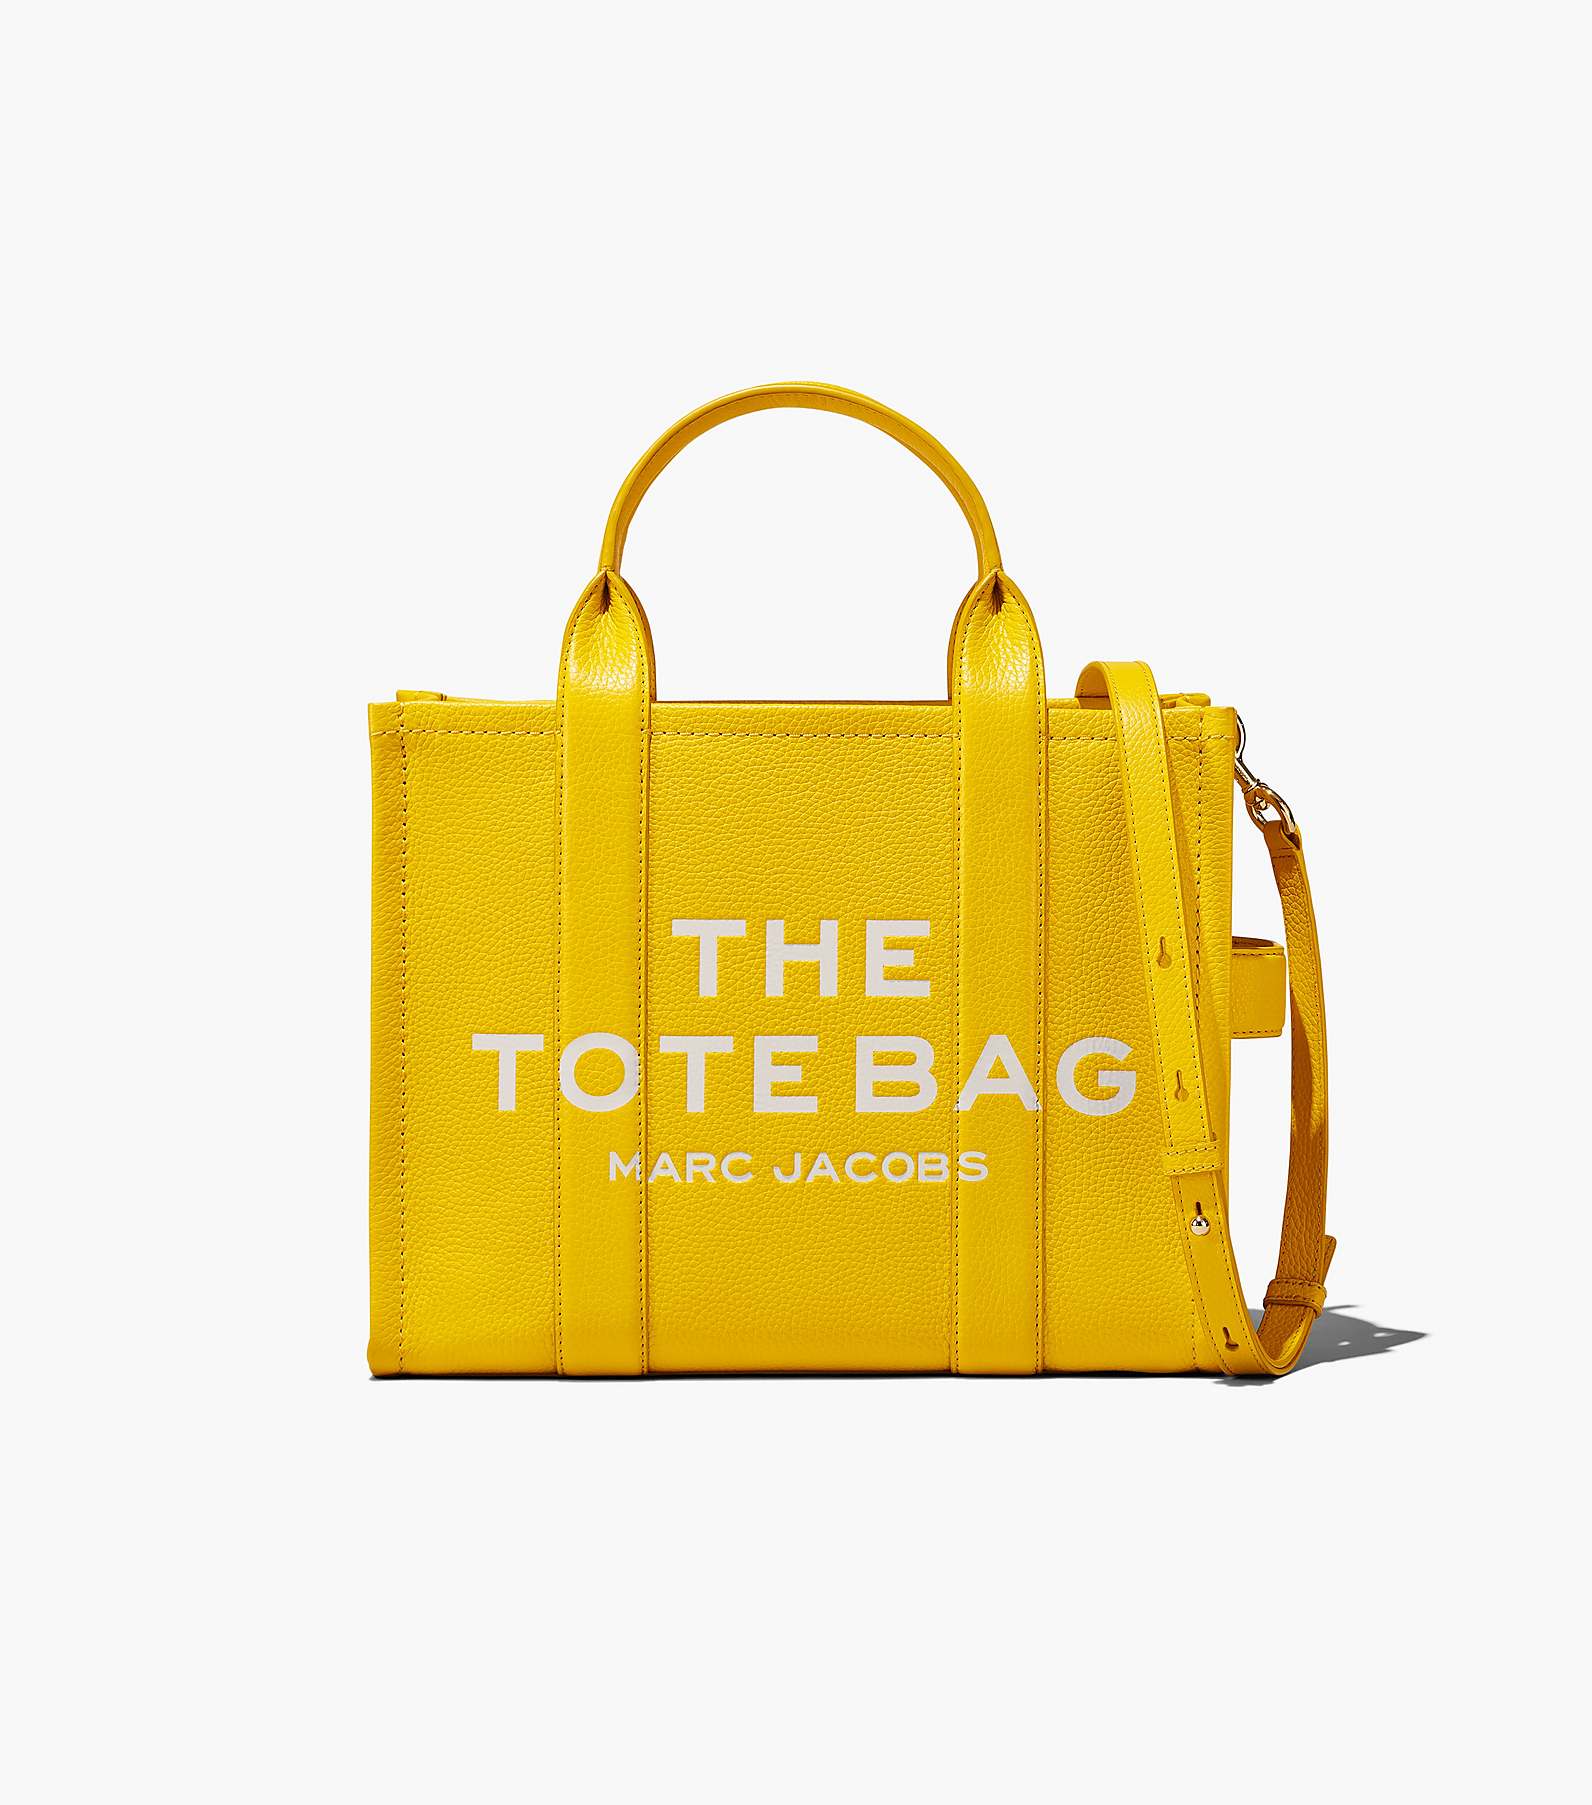 The Leather Medium Tote Bag(The Tote Bag)